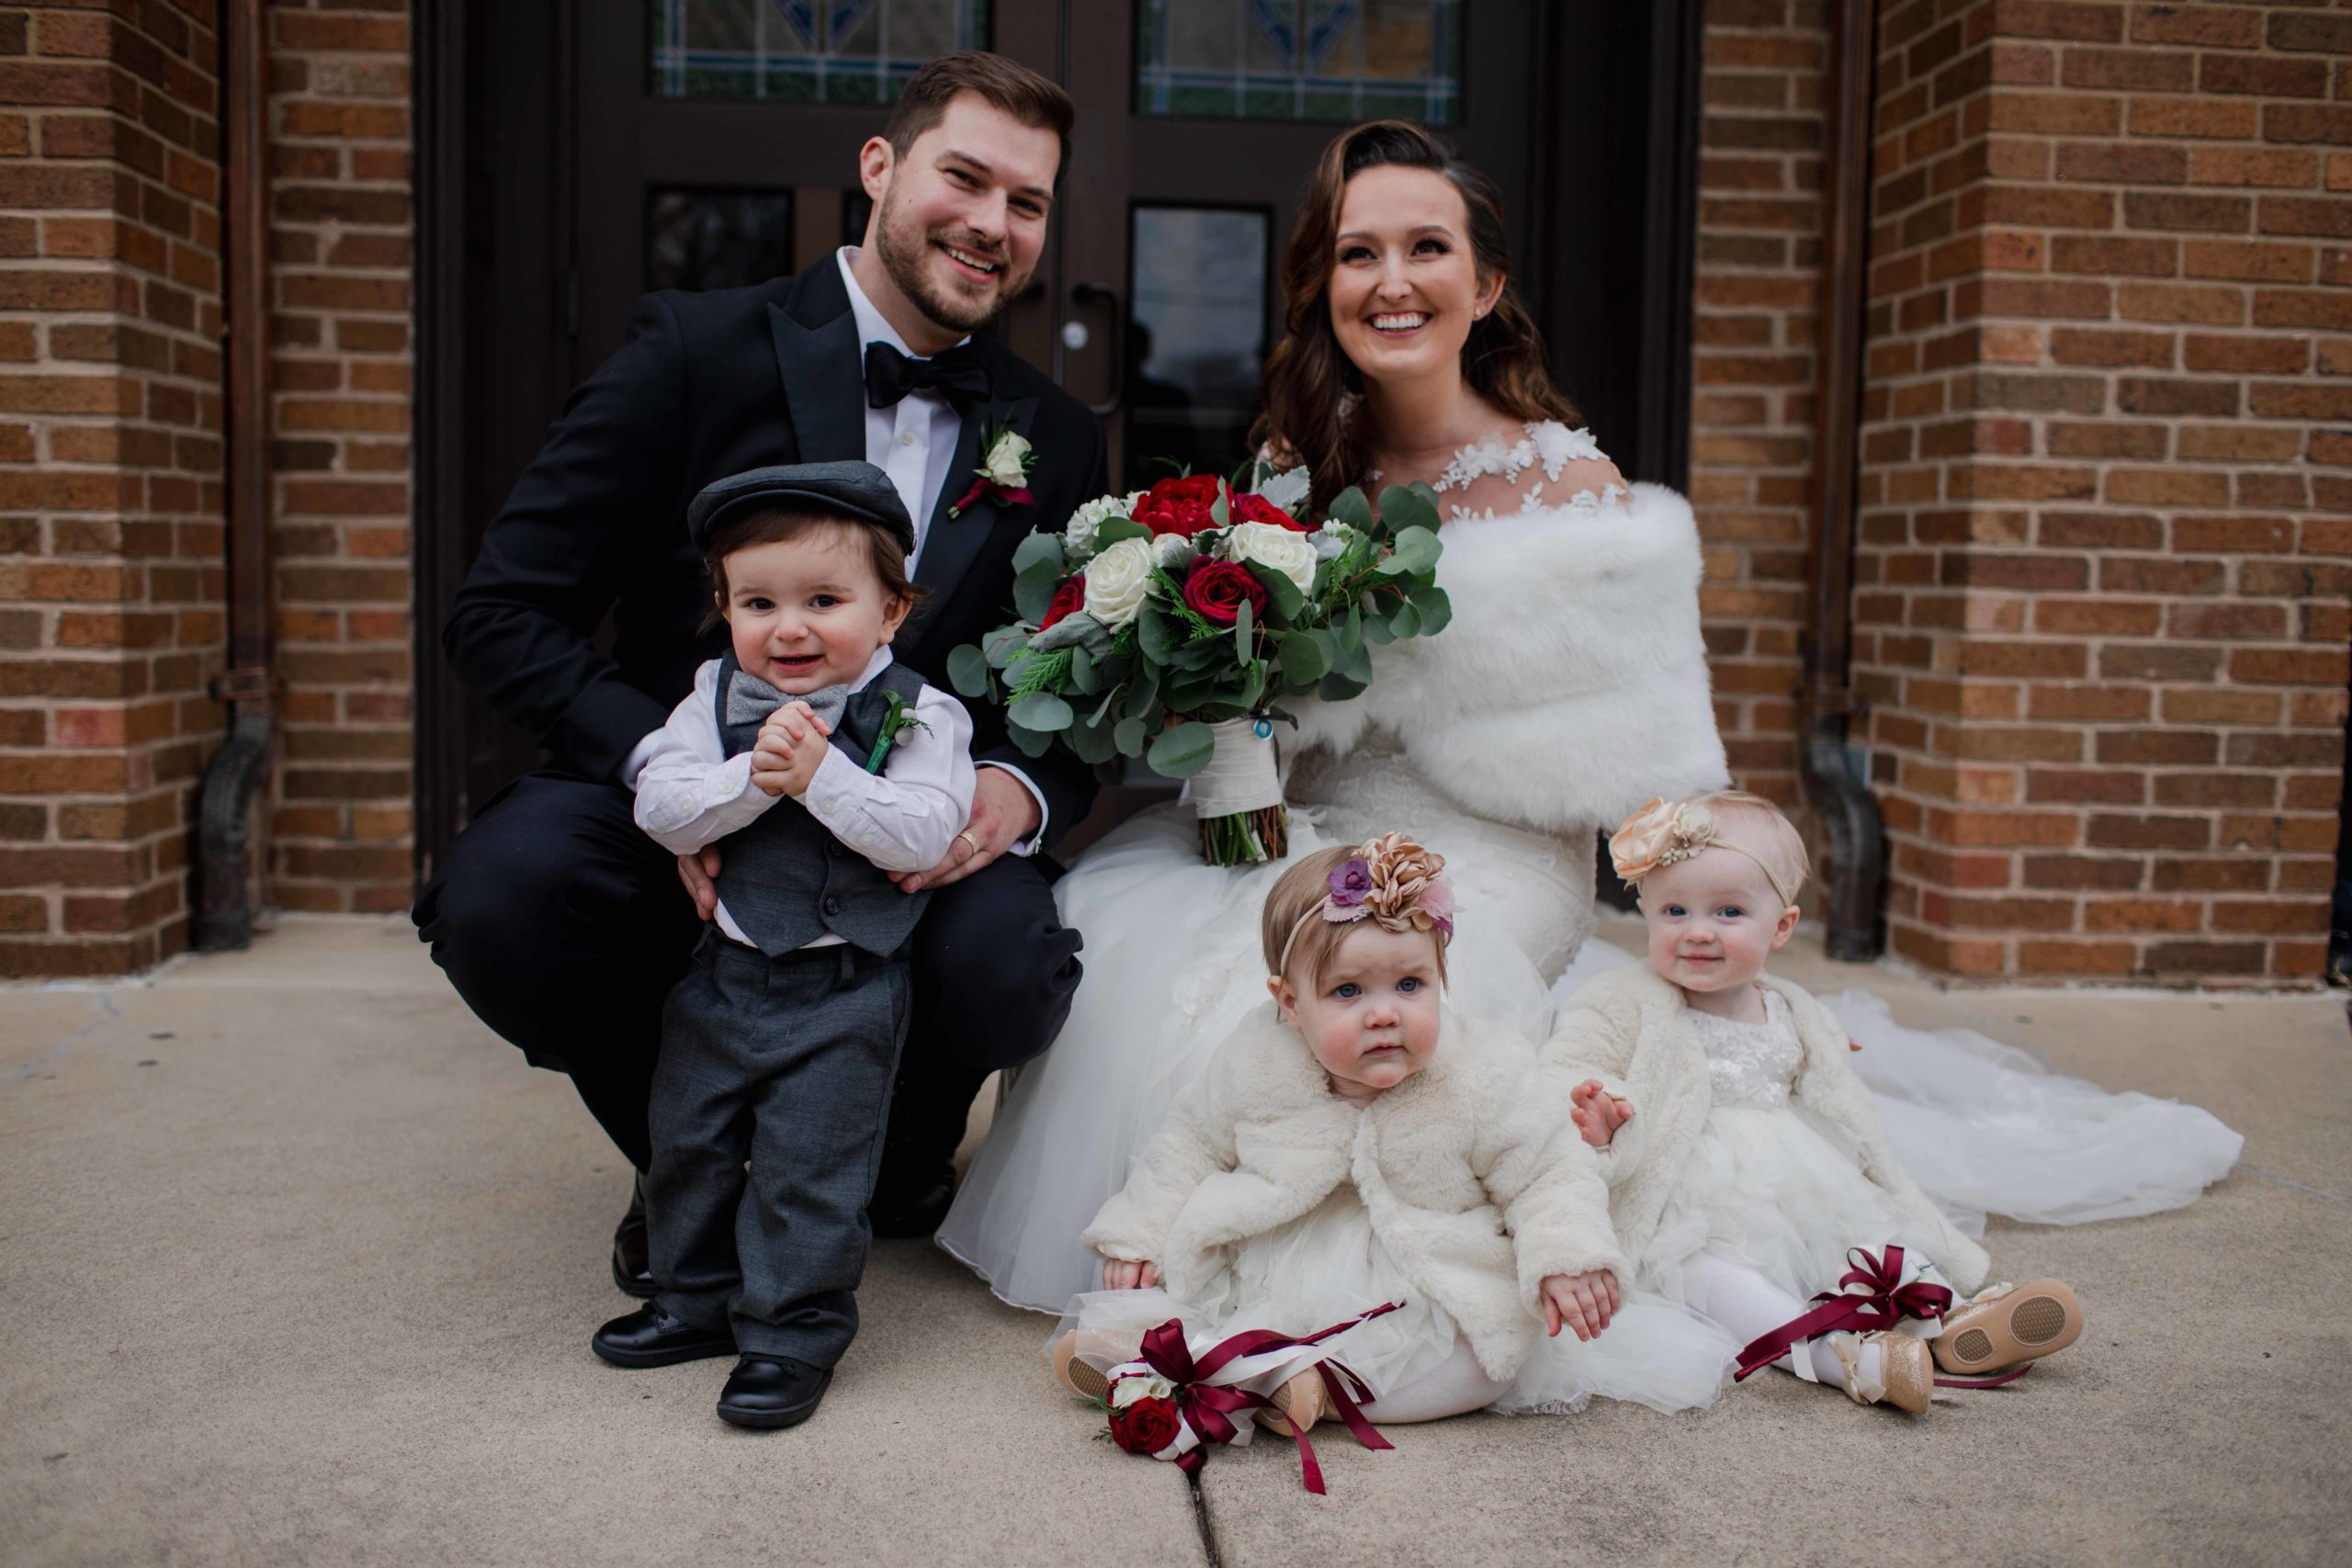 Hotel Baker Winter Wedding Photography Saint Charles Illinois Bride and Groom with Flower Girl and Ring Bearer